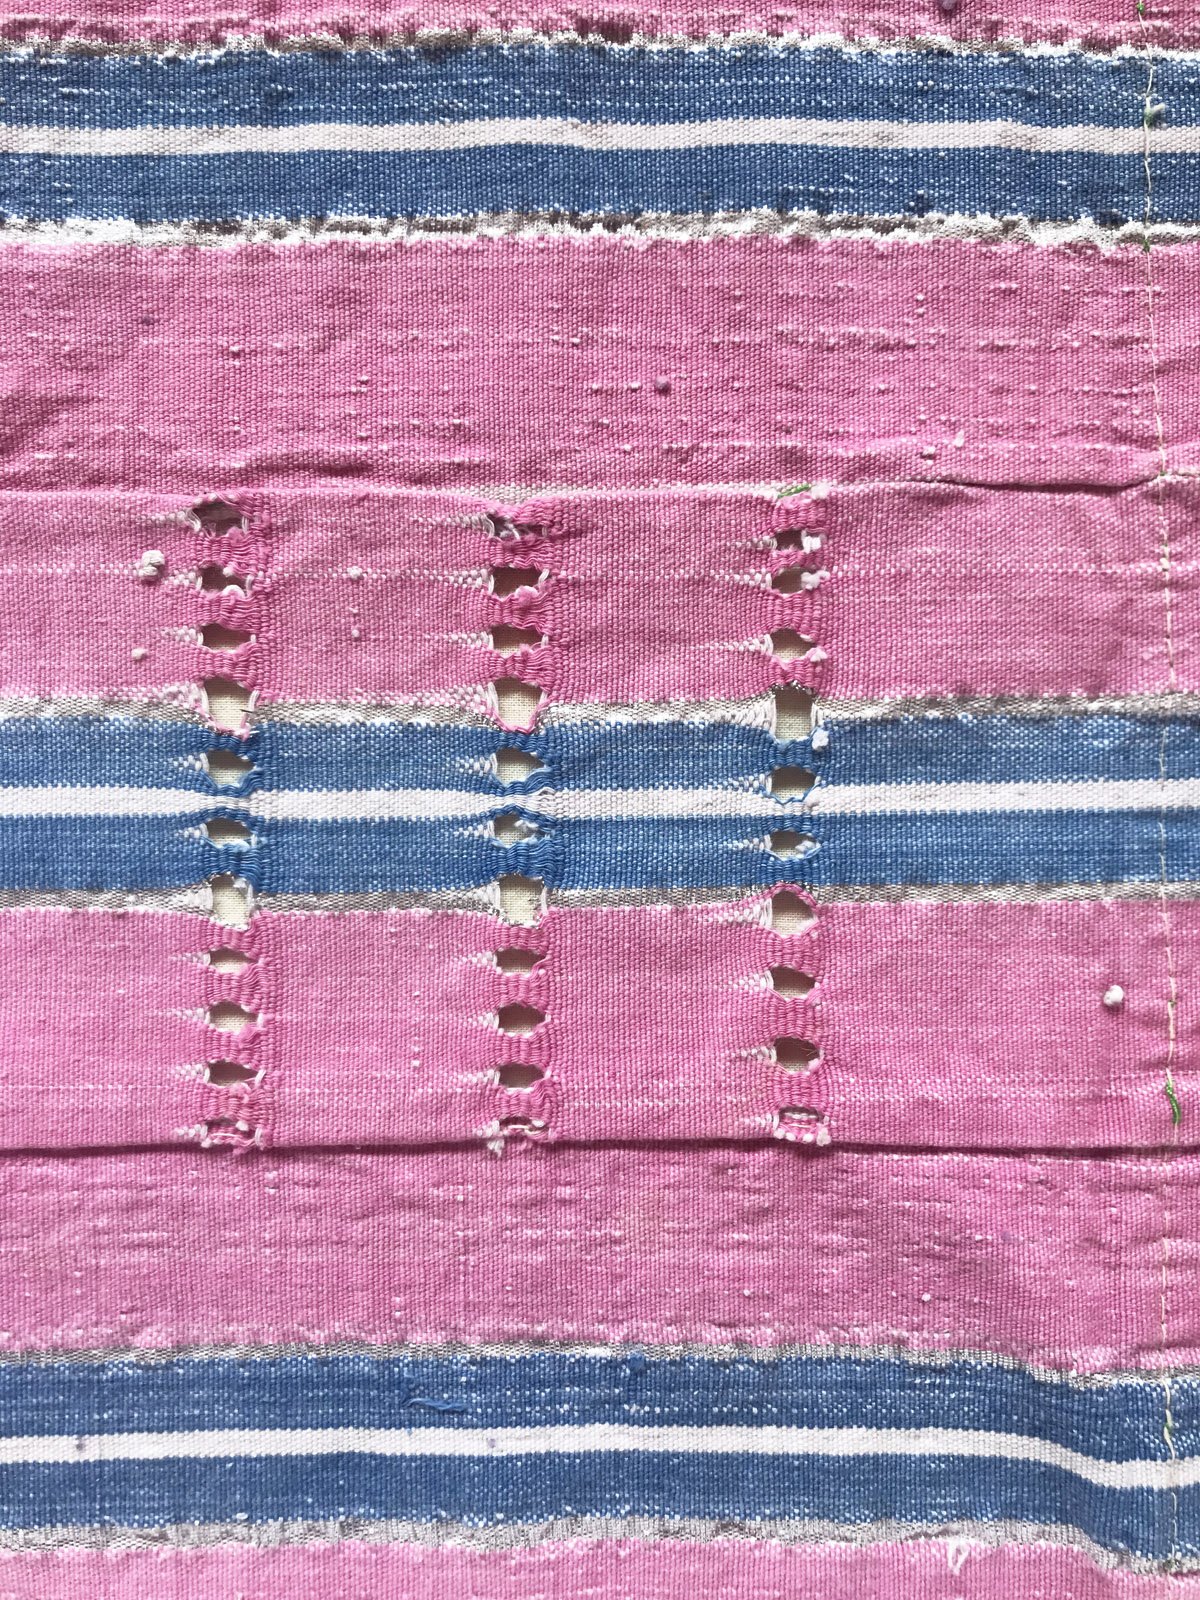 African Vintage Couture: Pink, Faded Blue, Silver, Eyelet — L'Etoffe ...